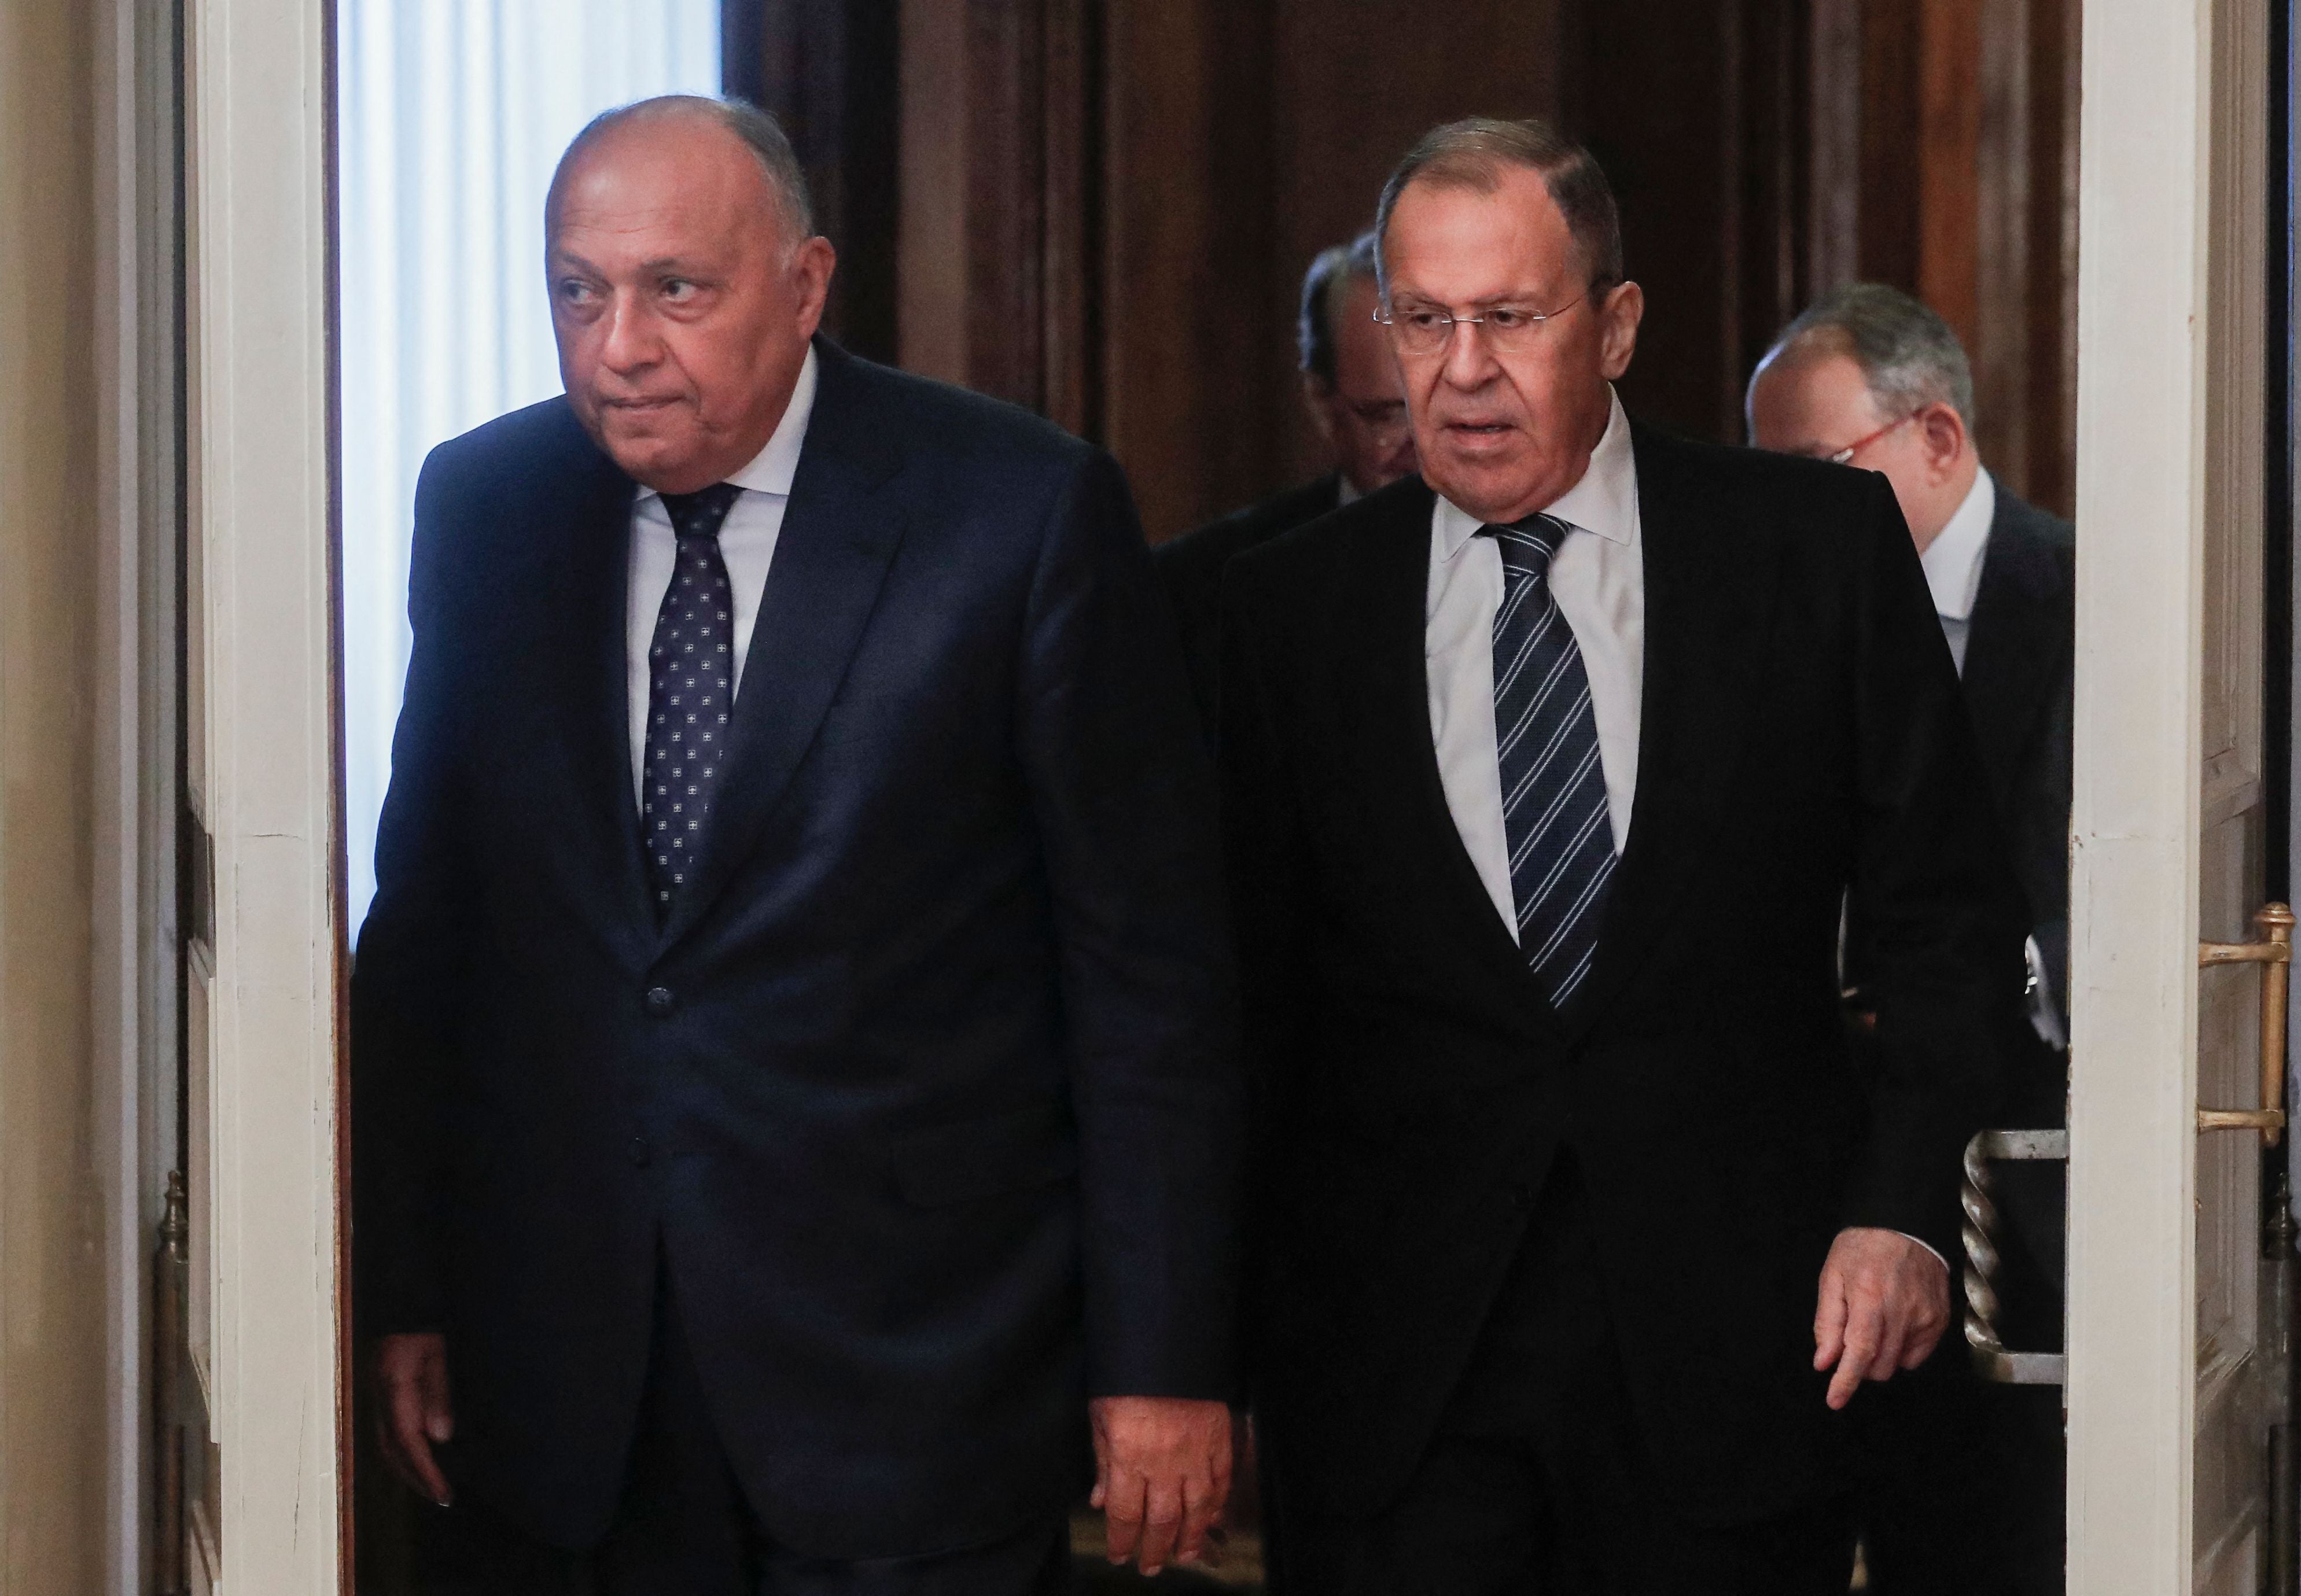 Russian foreign minister Sergei Lavrov (right) and his Egyptian counterpart Sameh Shoukry enter a hall during their meeting in Moscow